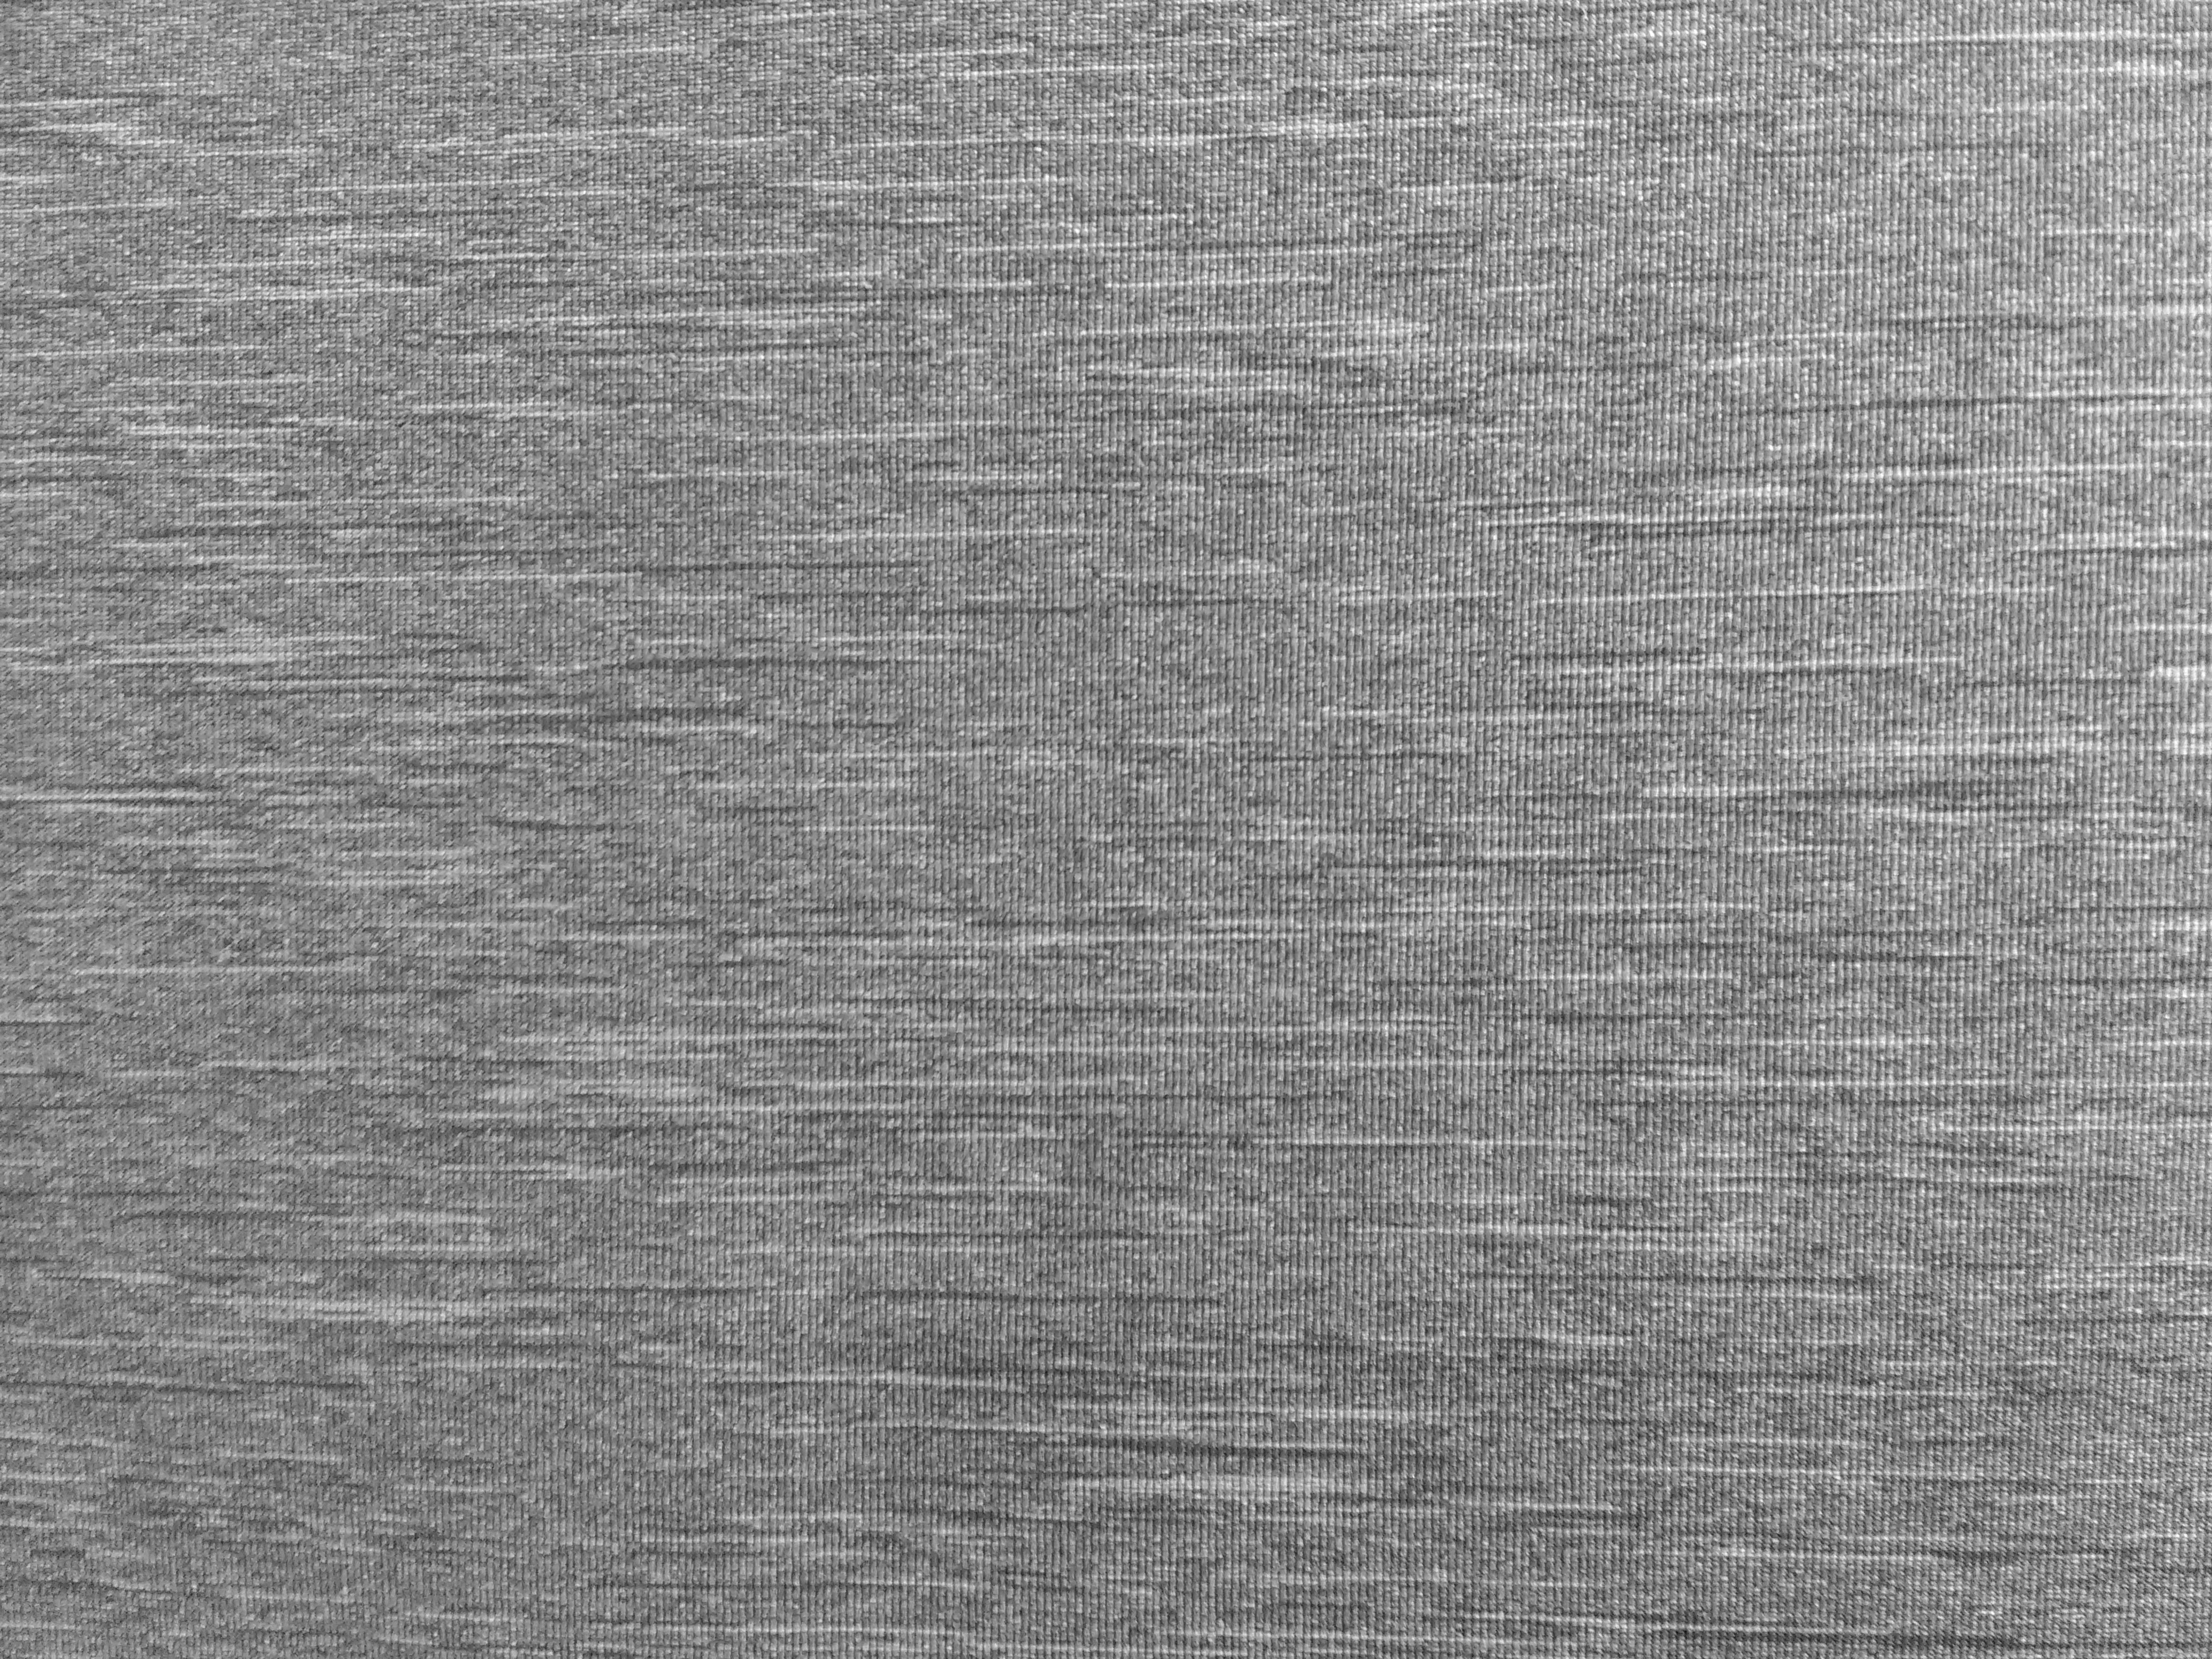 Gray Variegated Knit Fabric Texture Picture | Free Photograph | Photos